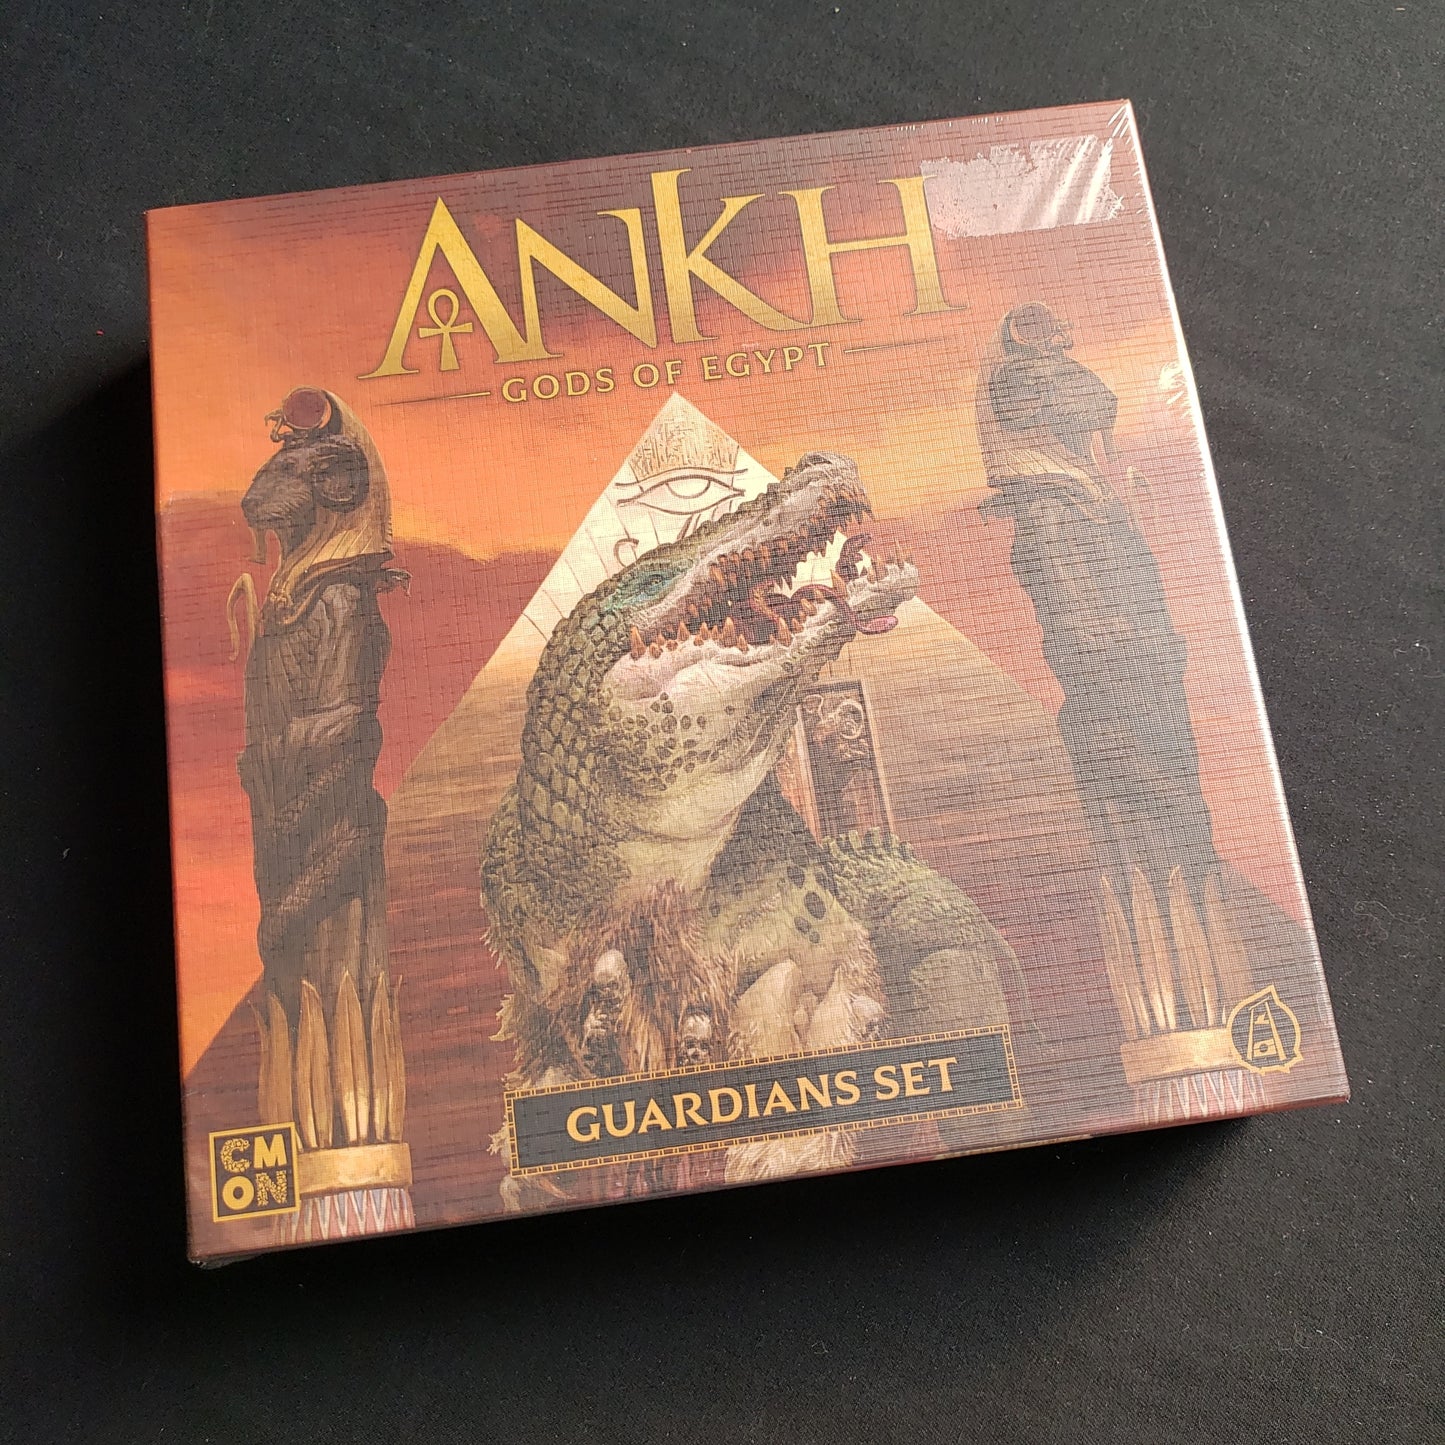 Image shows the front cover of the box of the Guardians Set expansion for the Ankh: Gods of Egypt board game